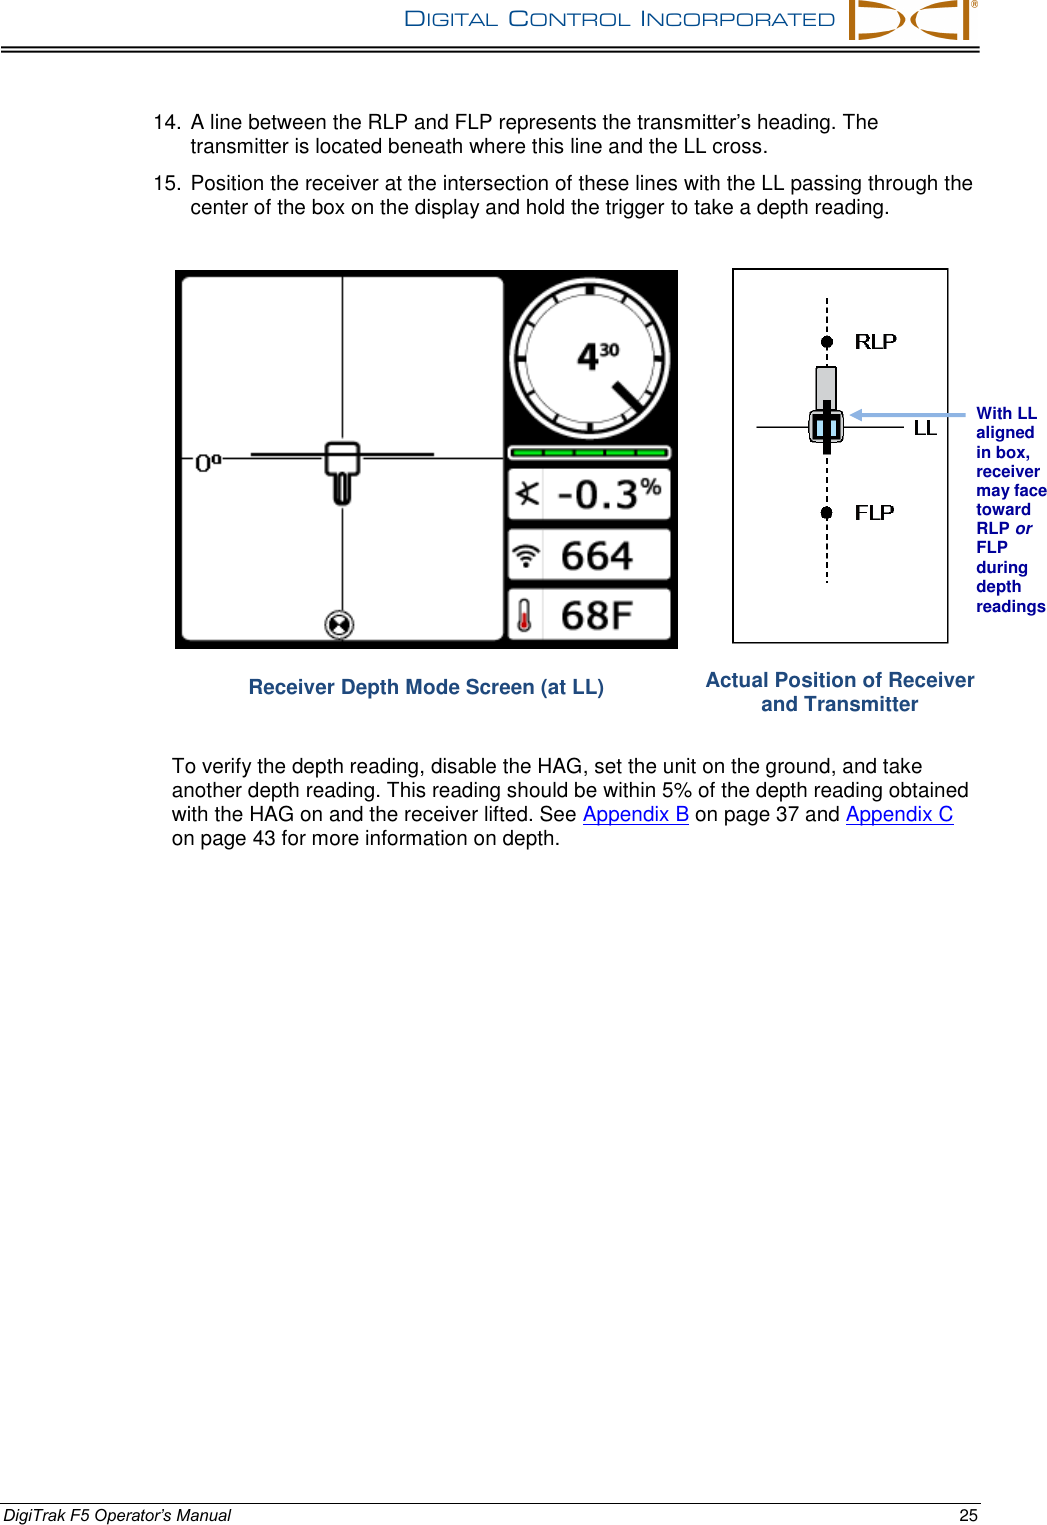 DIGITAL  CONTROL  INCORPORATED      DigiTrak F5 Operator’s Manual 25 14. A line between the RLP and FLP represents the transmitter’s heading. The transmitter is located beneath where this line and the LL cross. 15. Position the receiver at the intersection of these lines with the LL passing through the center of the box on the display and hold the trigger to take a depth reading.  Receiver Depth Mode Screen (at LL)  Actual Position of Receiver and Transmitter To verify the depth reading, disable the HAG, set the unit on the ground, and take another depth reading. This reading should be within 5% of the depth reading obtained with the HAG on and the receiver lifted. See Appendix B on page 37 and Appendix C on page 43 for more information on depth. With LL aligned in box, receiver may face toward RLP or FLP during depth readings 